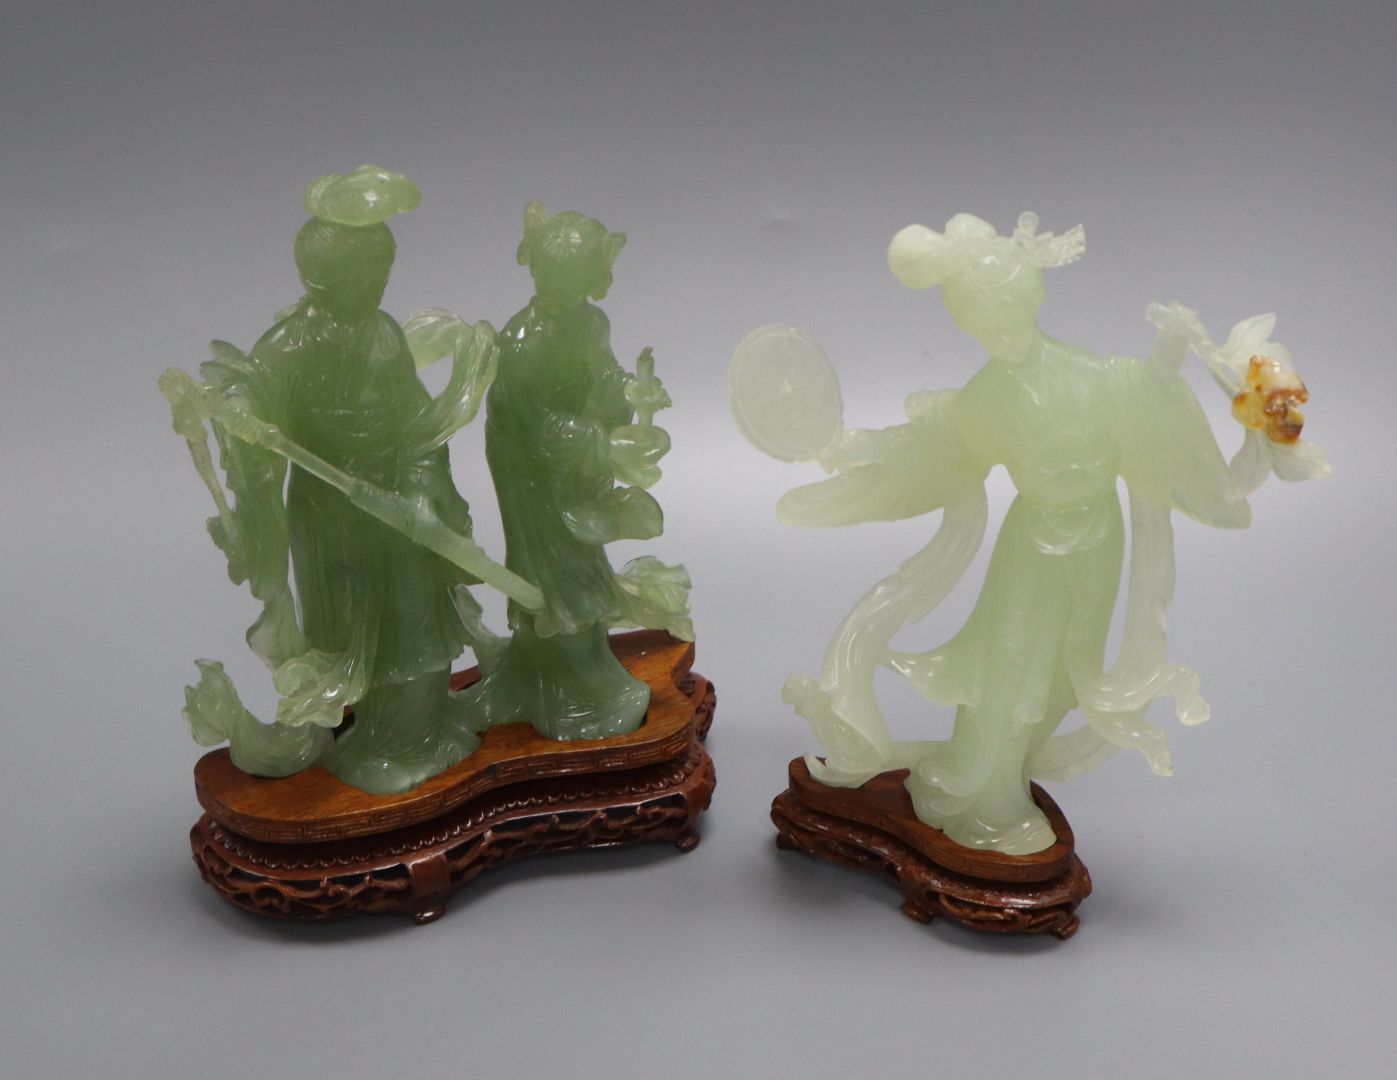 A 20th century Chinese carved bowenite jade figure of a courtesan and a similar group of a noble